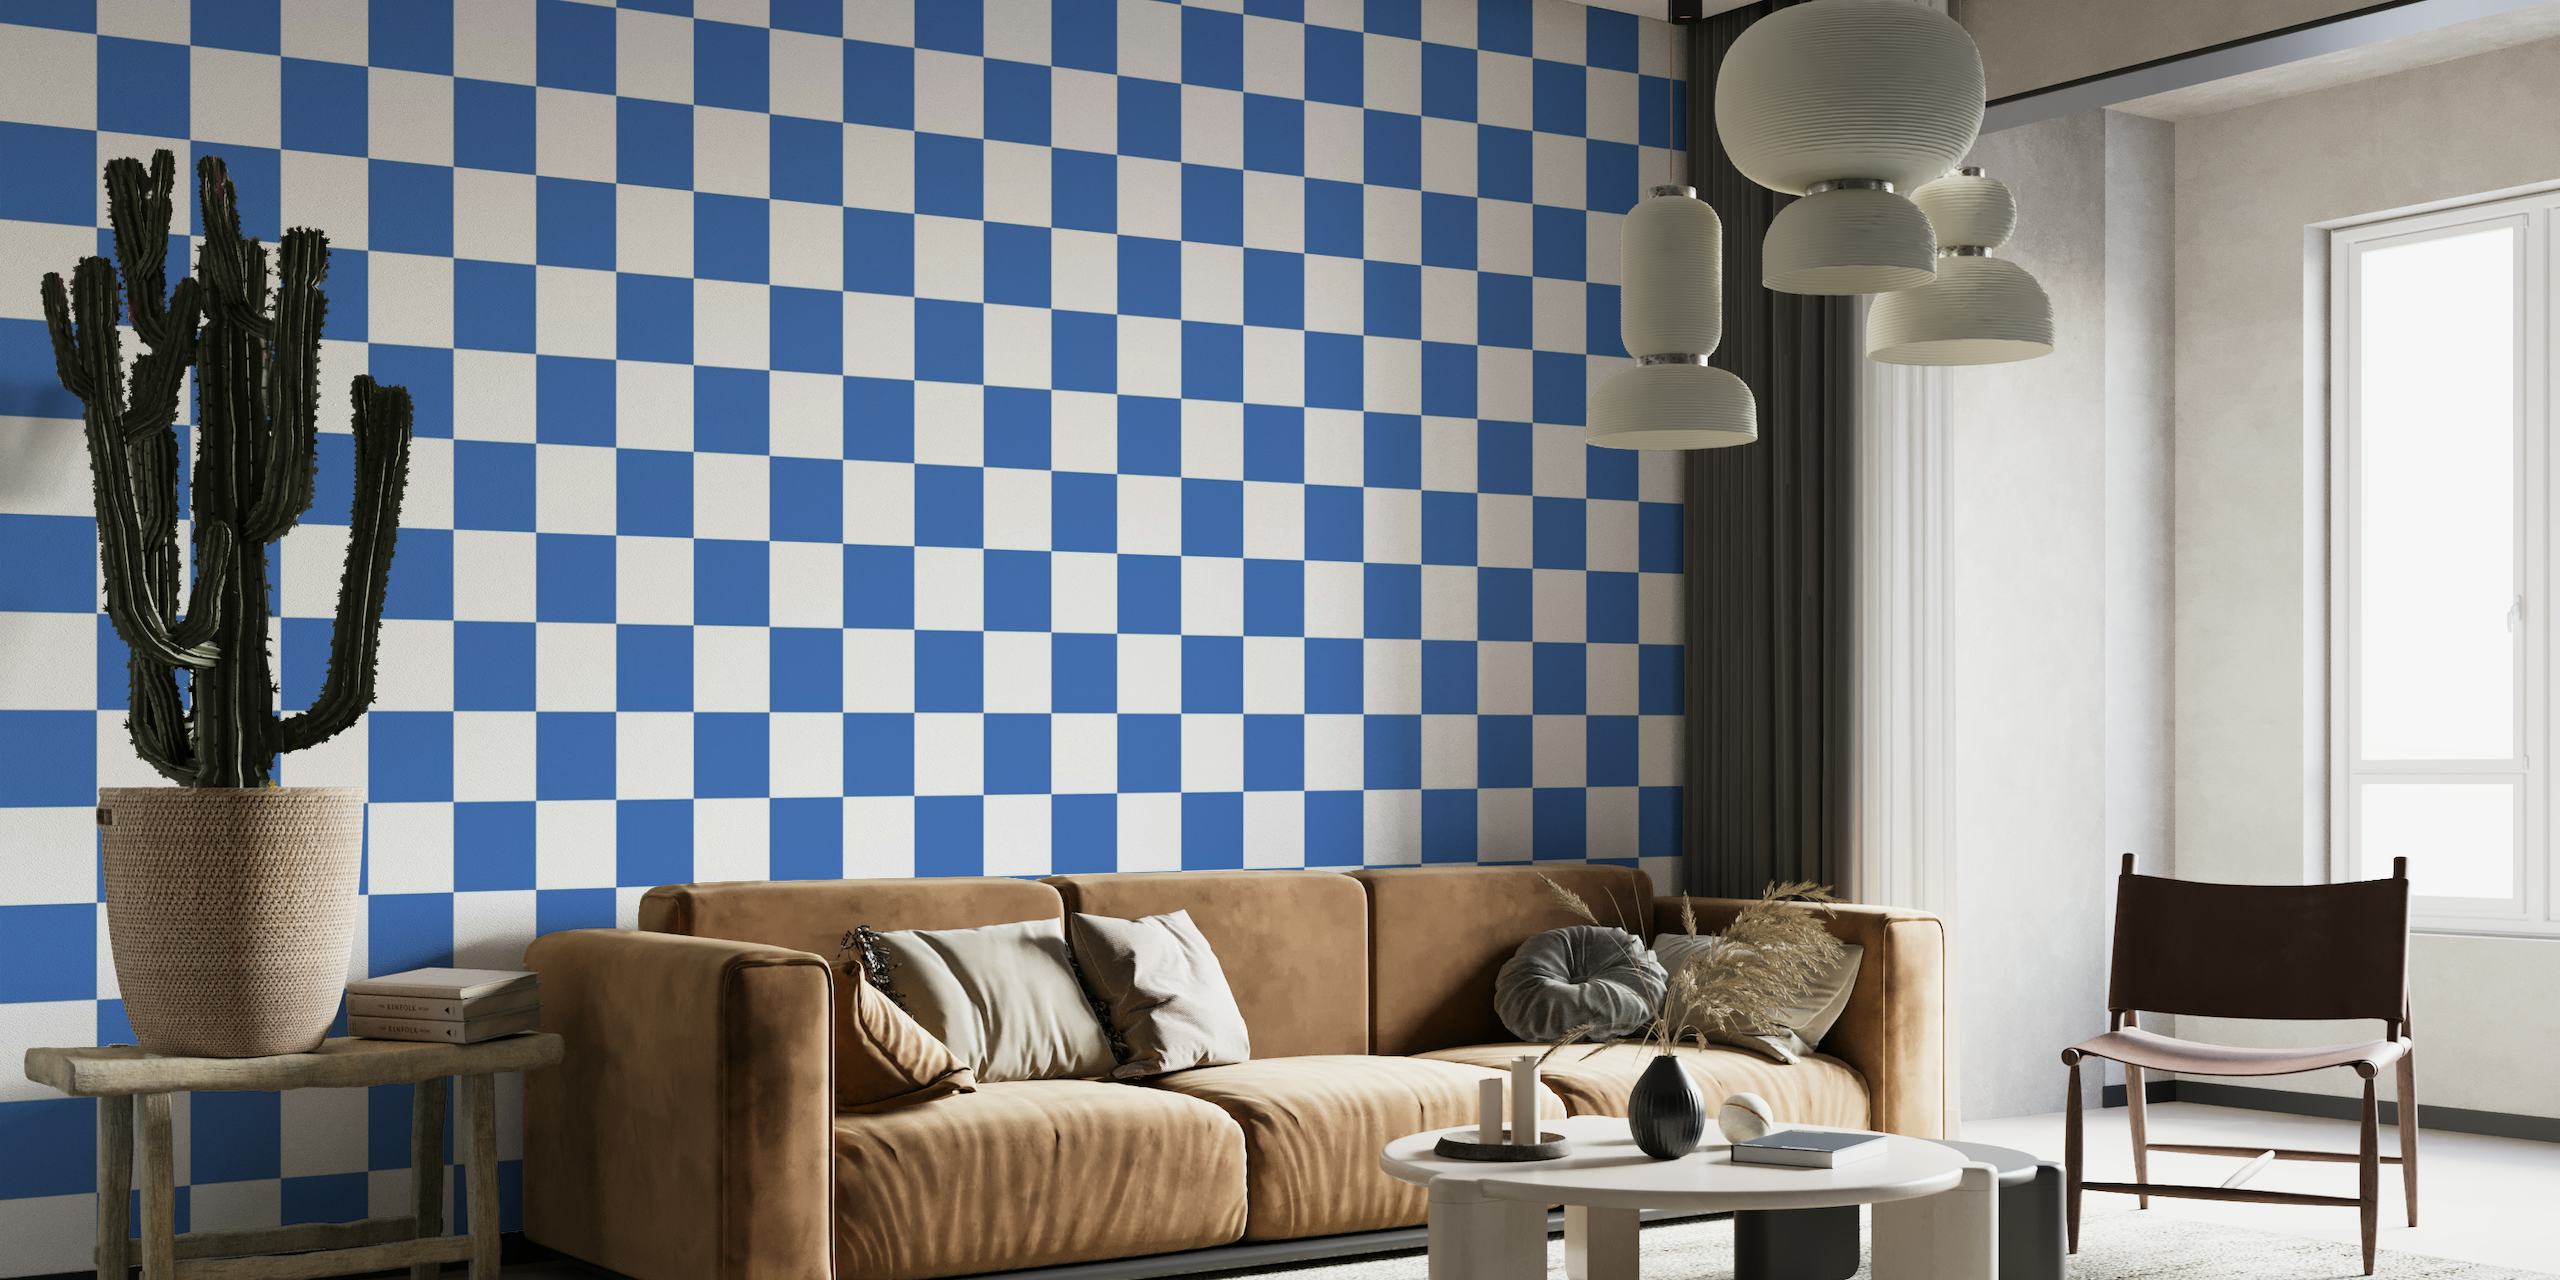 Checkerboard Large - Blue and White behang